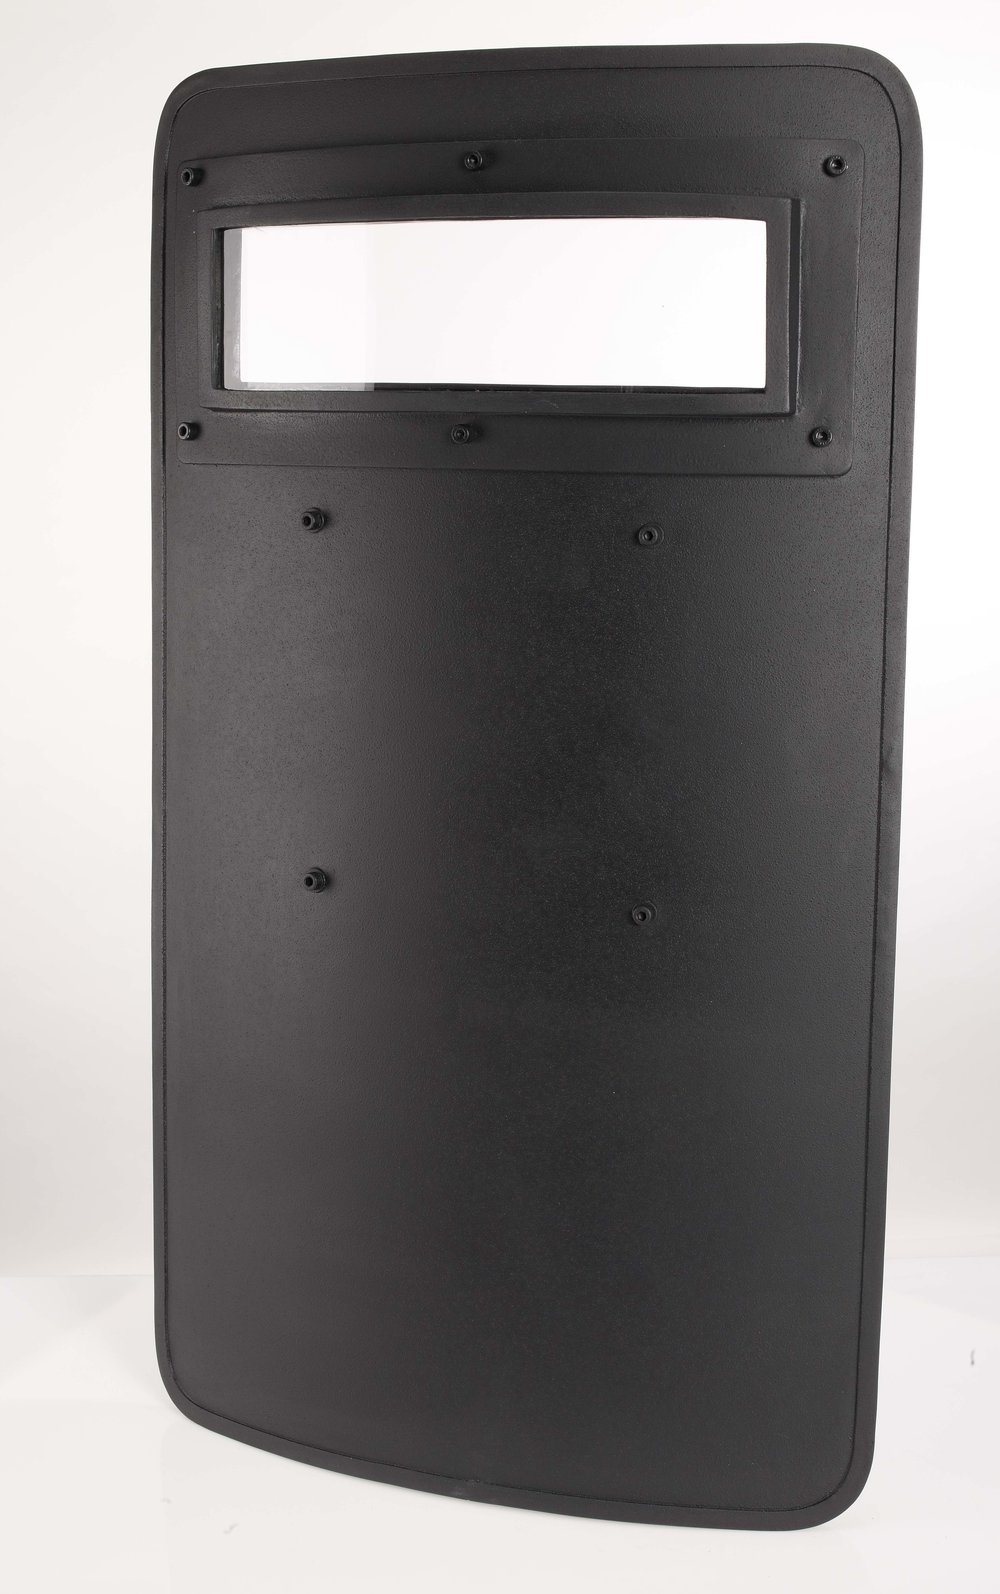 UNITED SHIELD Riot Shield: Riot, 48 in Ht, 24 in Wd, 9.25 lb Wt, Curved